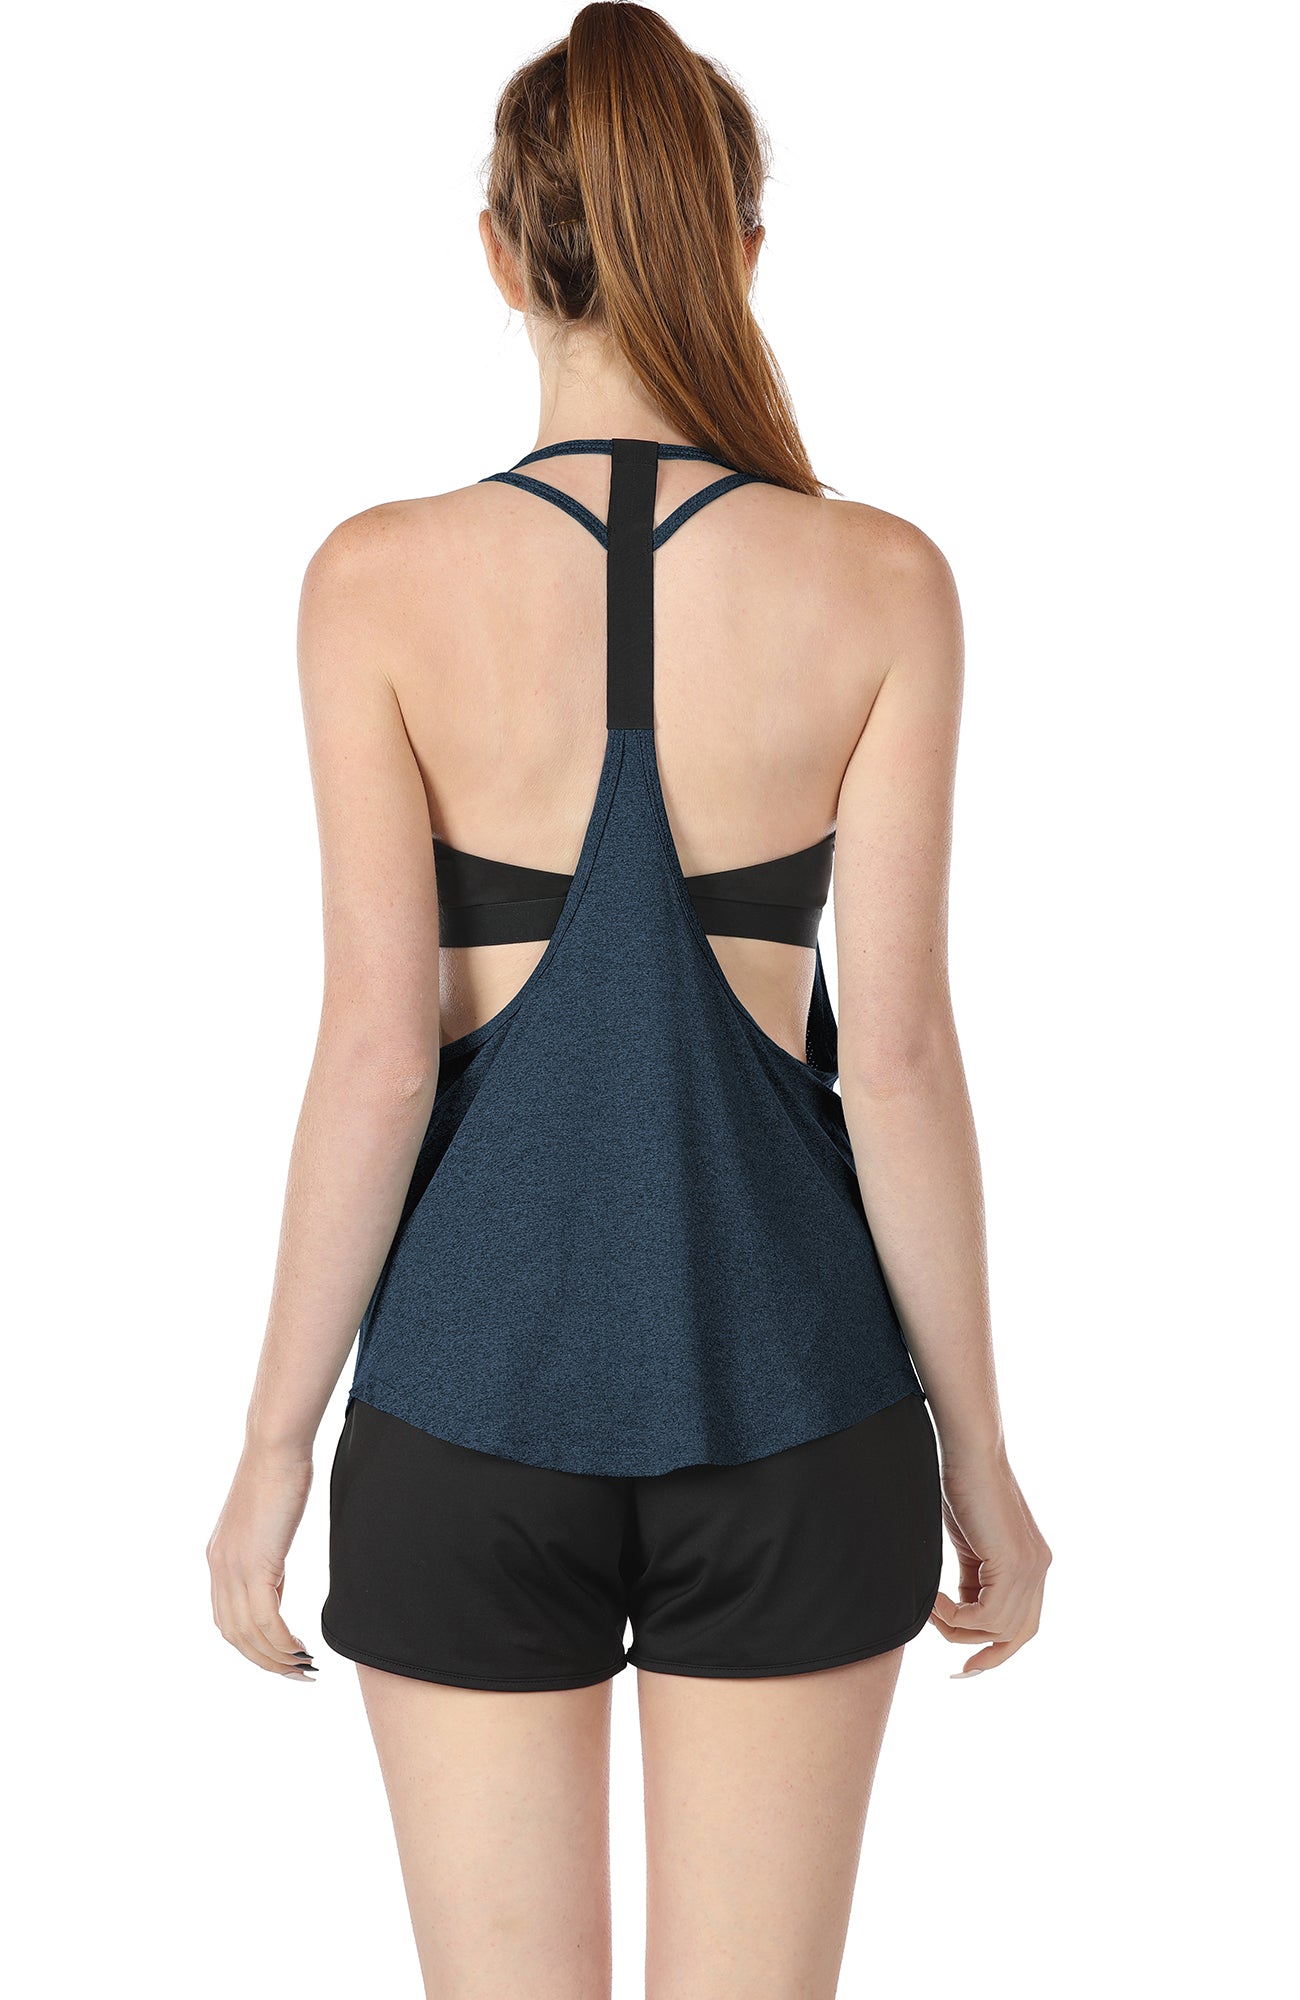 Vorcy Workout Tank Tops for Women with Built in Bra Strappy